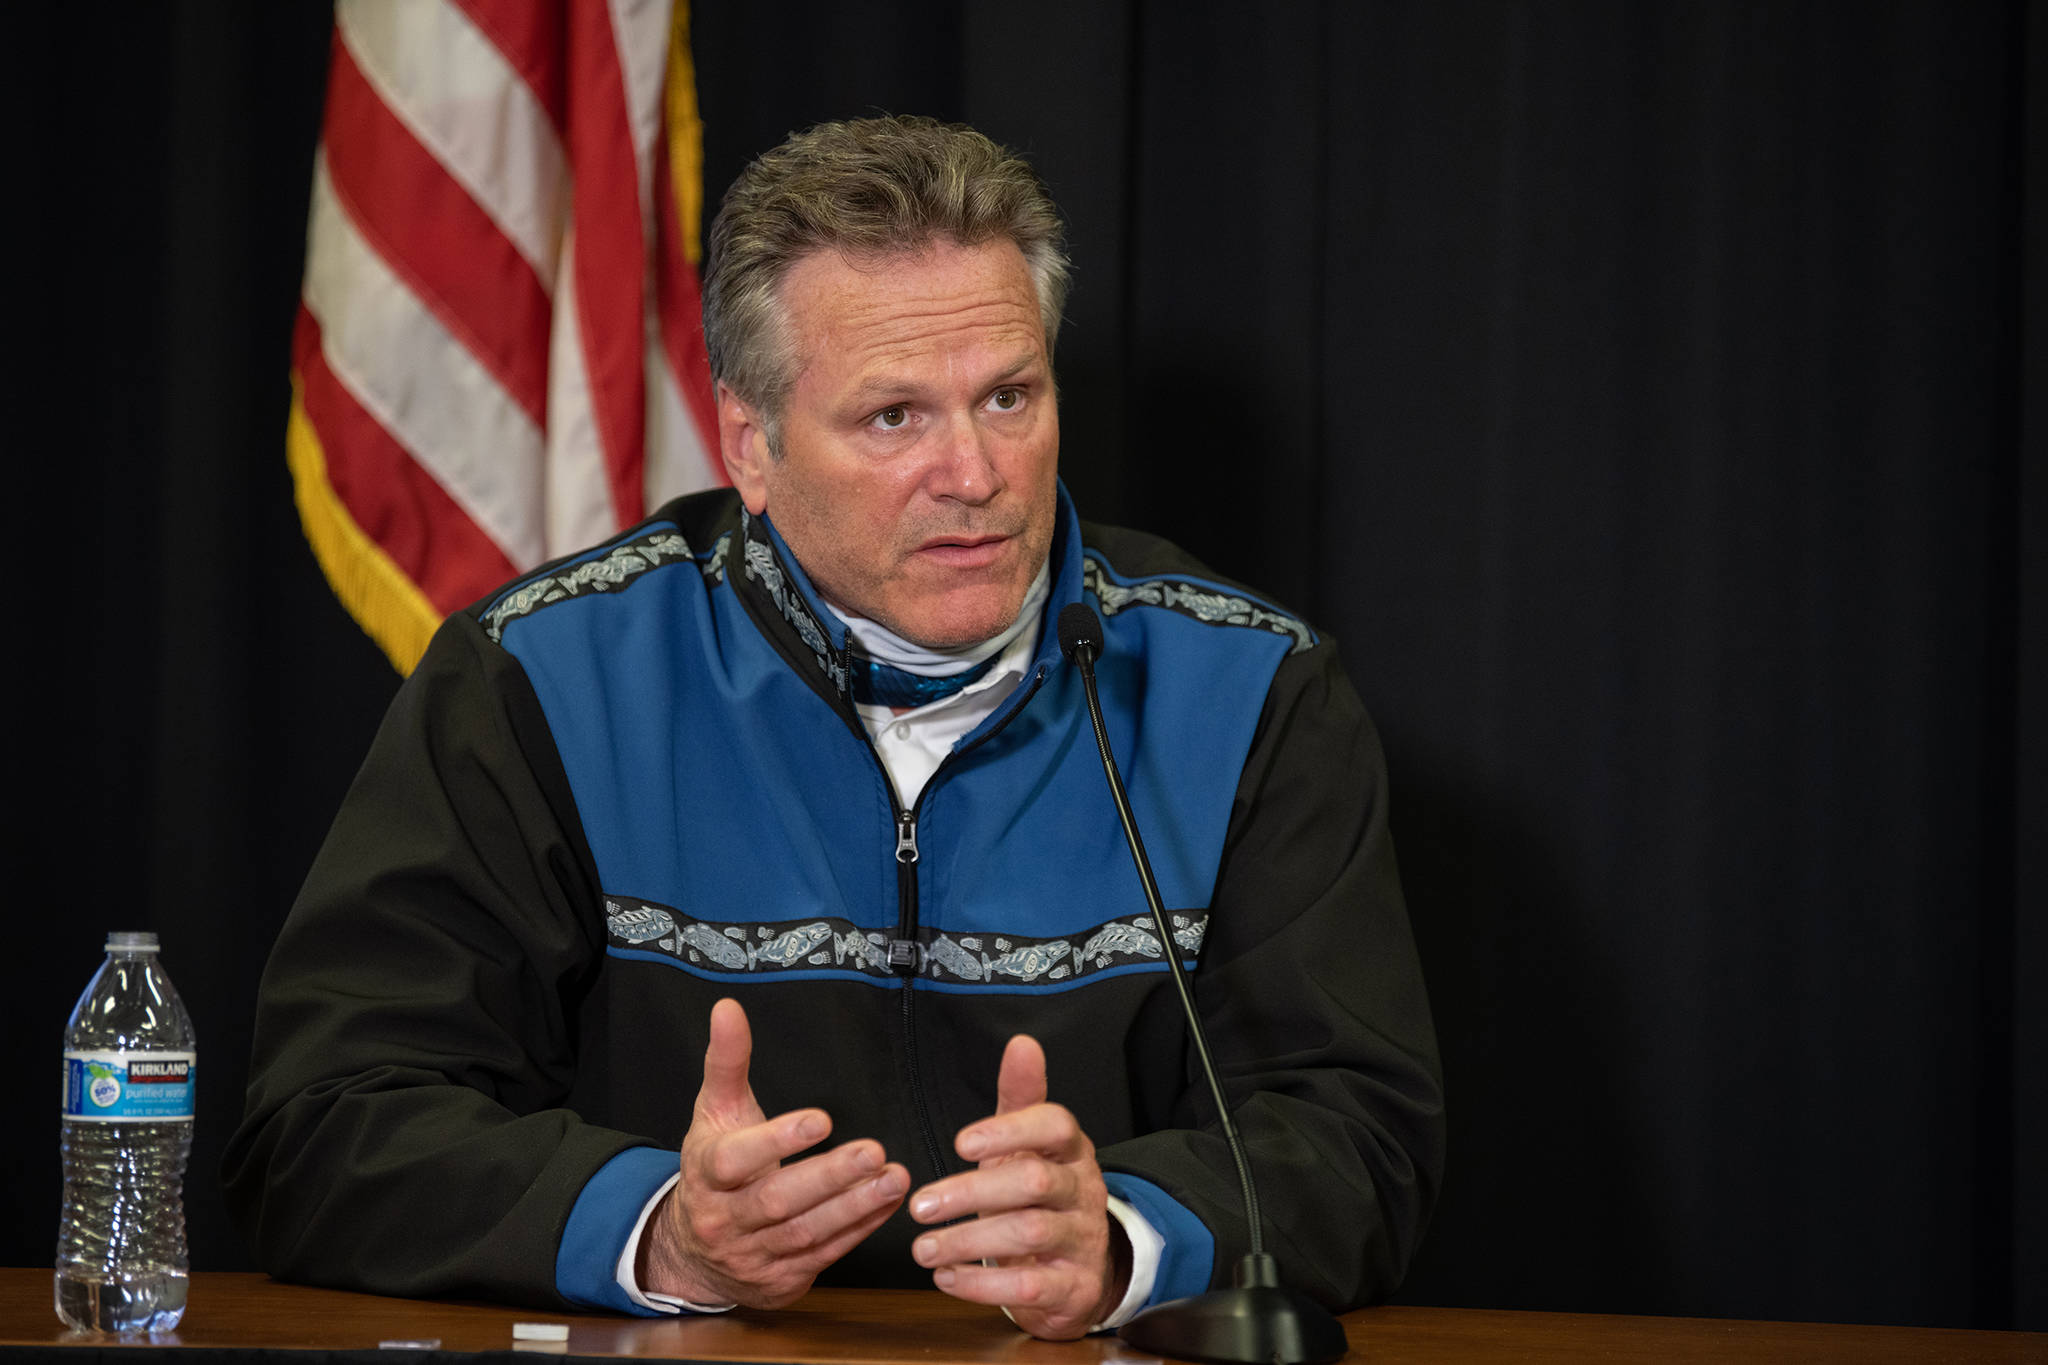 Gov. Mike Dunleavy speaks during a virtual town hall meeting on Sept. 15. (Courtesy Photo / Office of Gov. Mike Dunleavy)